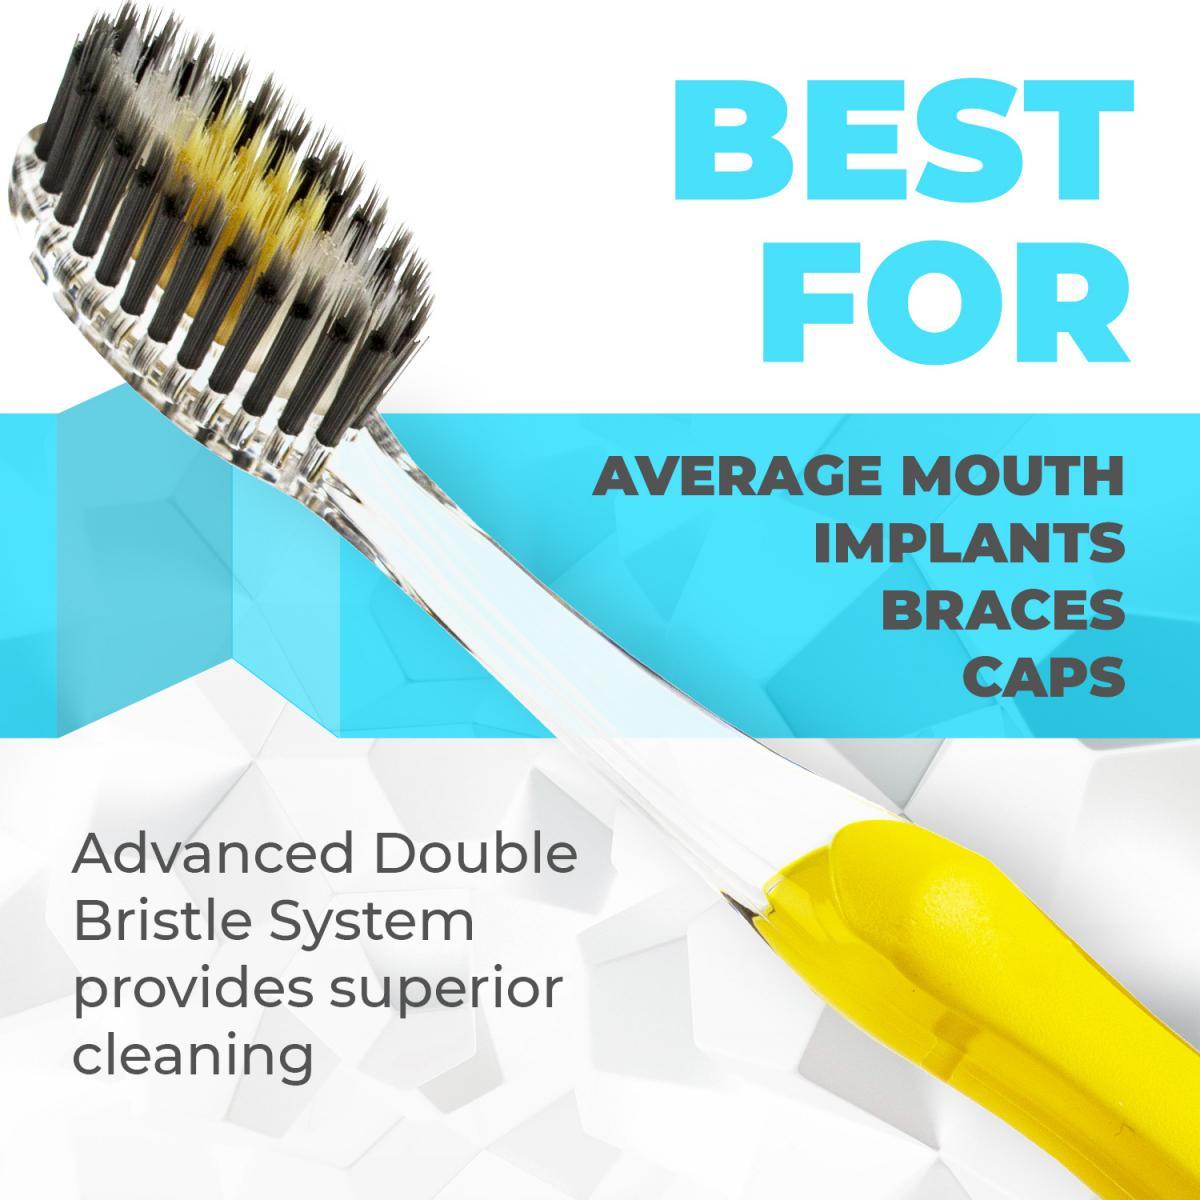 Solodent toothbrush antimicrobial silver, charcoal & gold infused soft bristles.Best for sensitive teeth, gums, braces